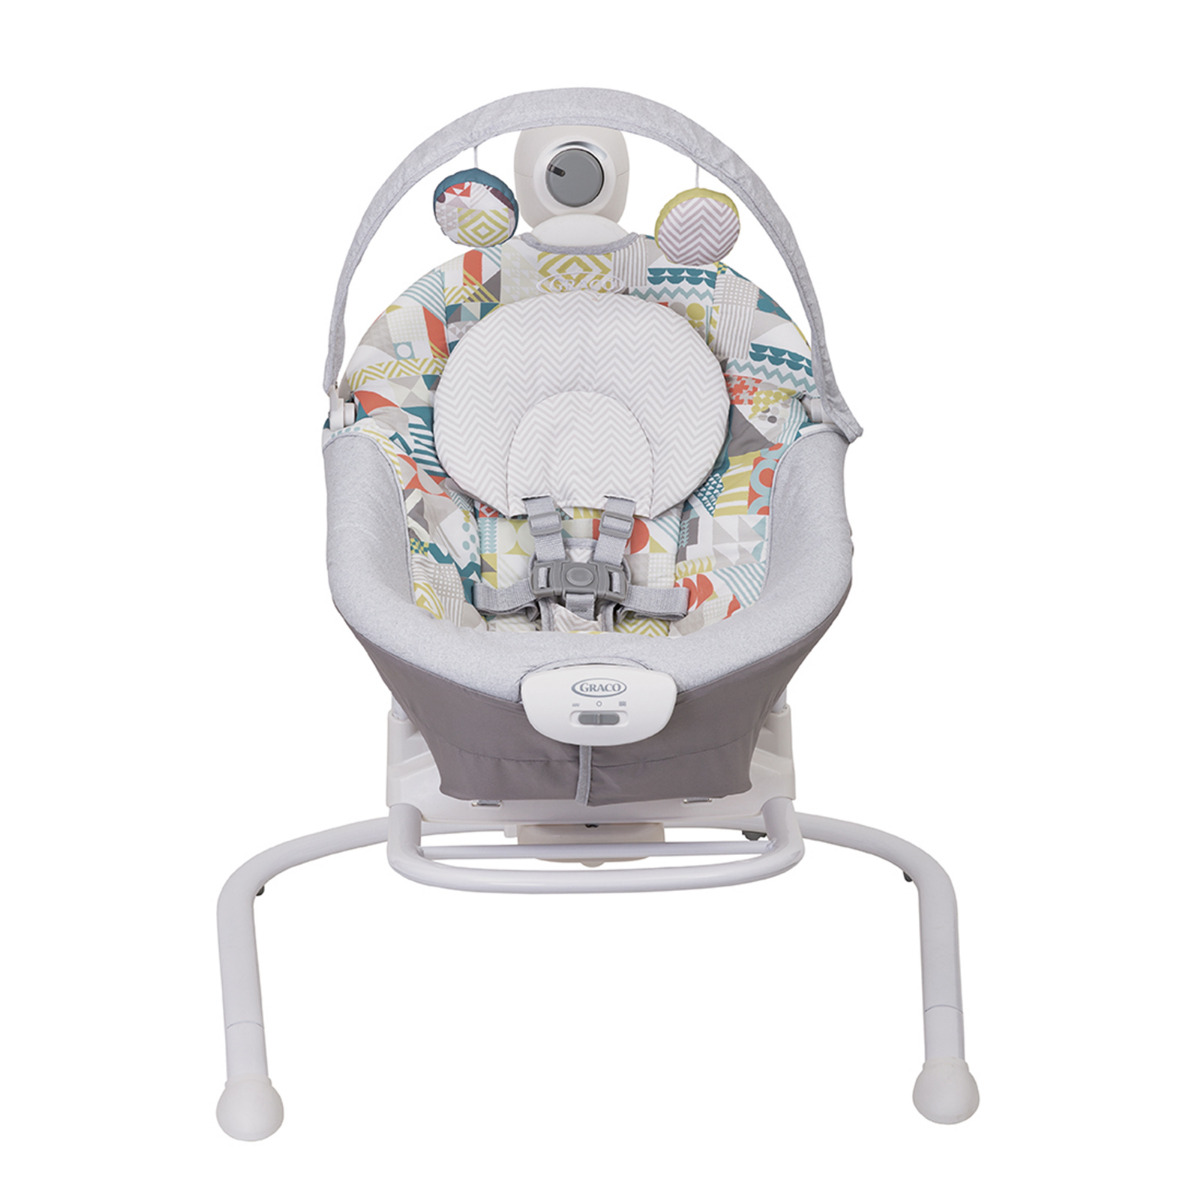 Graco Duet Sway baby swing front view 